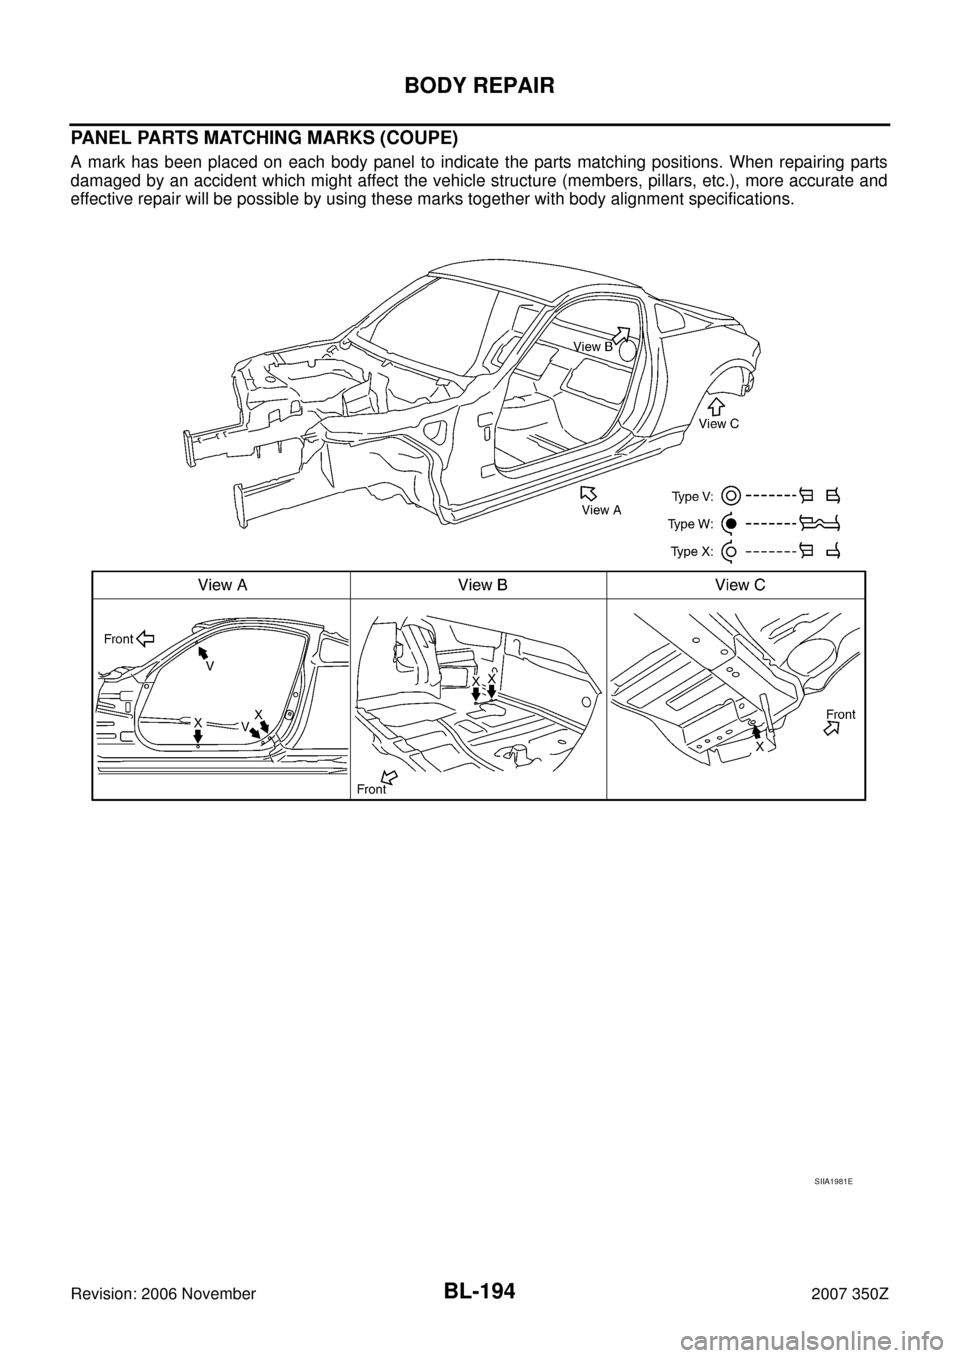 NISSAN 350Z 2007 Z33 Body, Lock And Security System Workshop Manual BL-194
BODY REPAIR
Revision: 2006 November2007 350Z
PANEL PARTS MATCHING MARKS (COUPE)
A mark has been placed on each body panel to indicate the parts matching positions. When repairing parts
damaged 